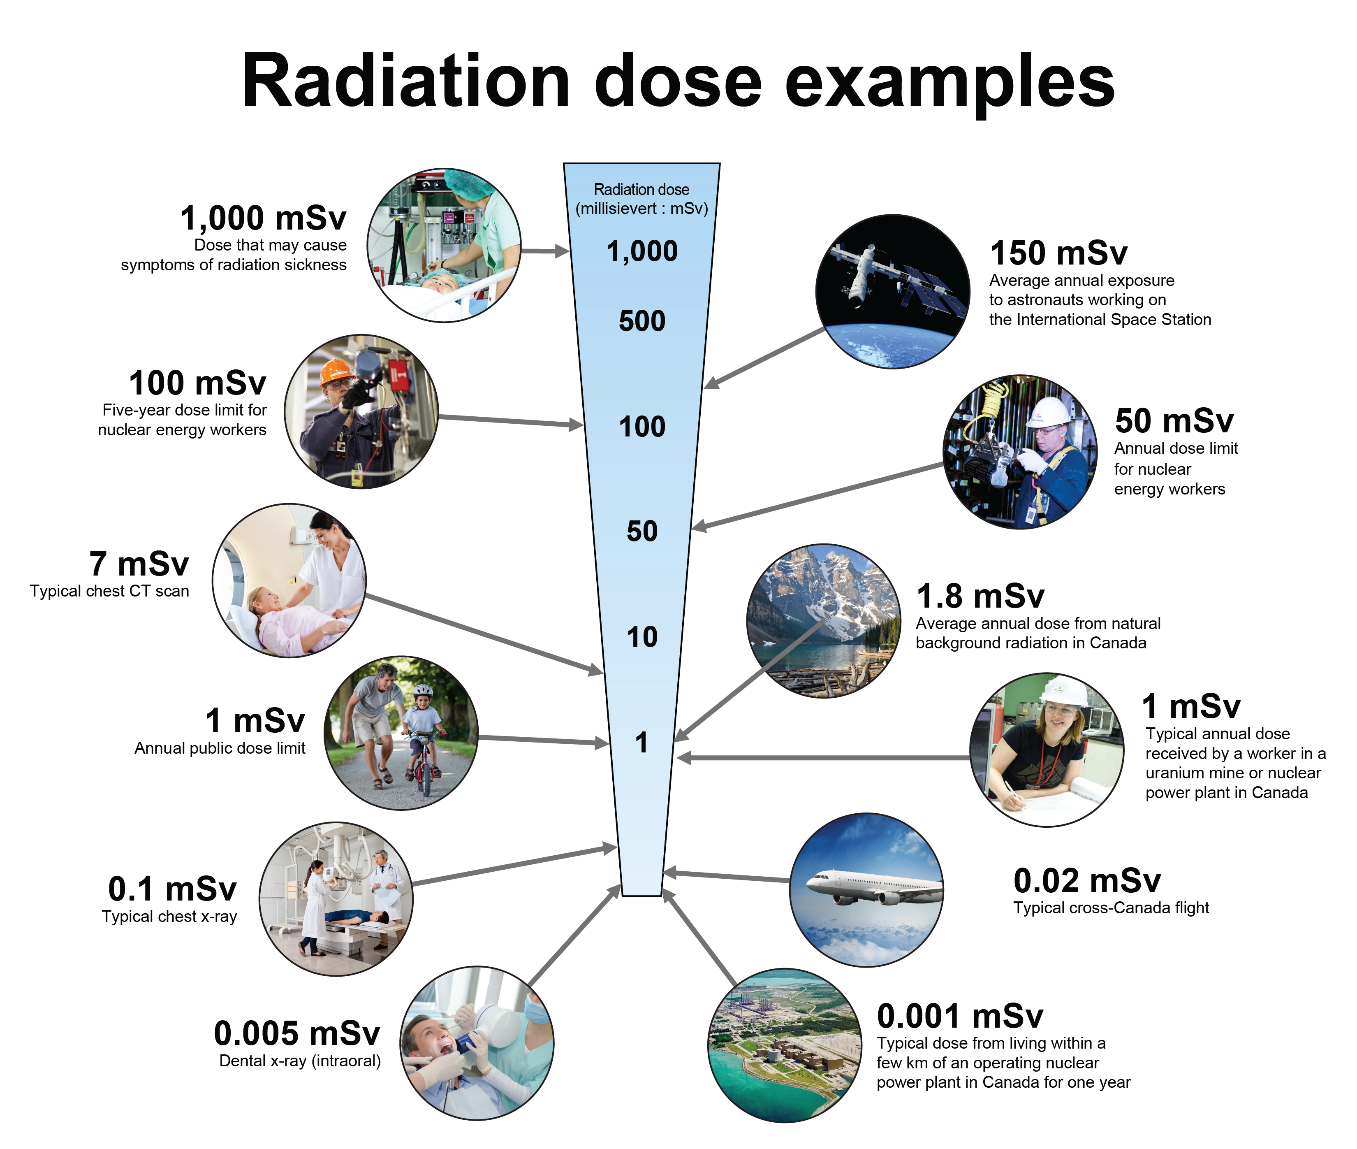 Radiation dose examples. Text version below.